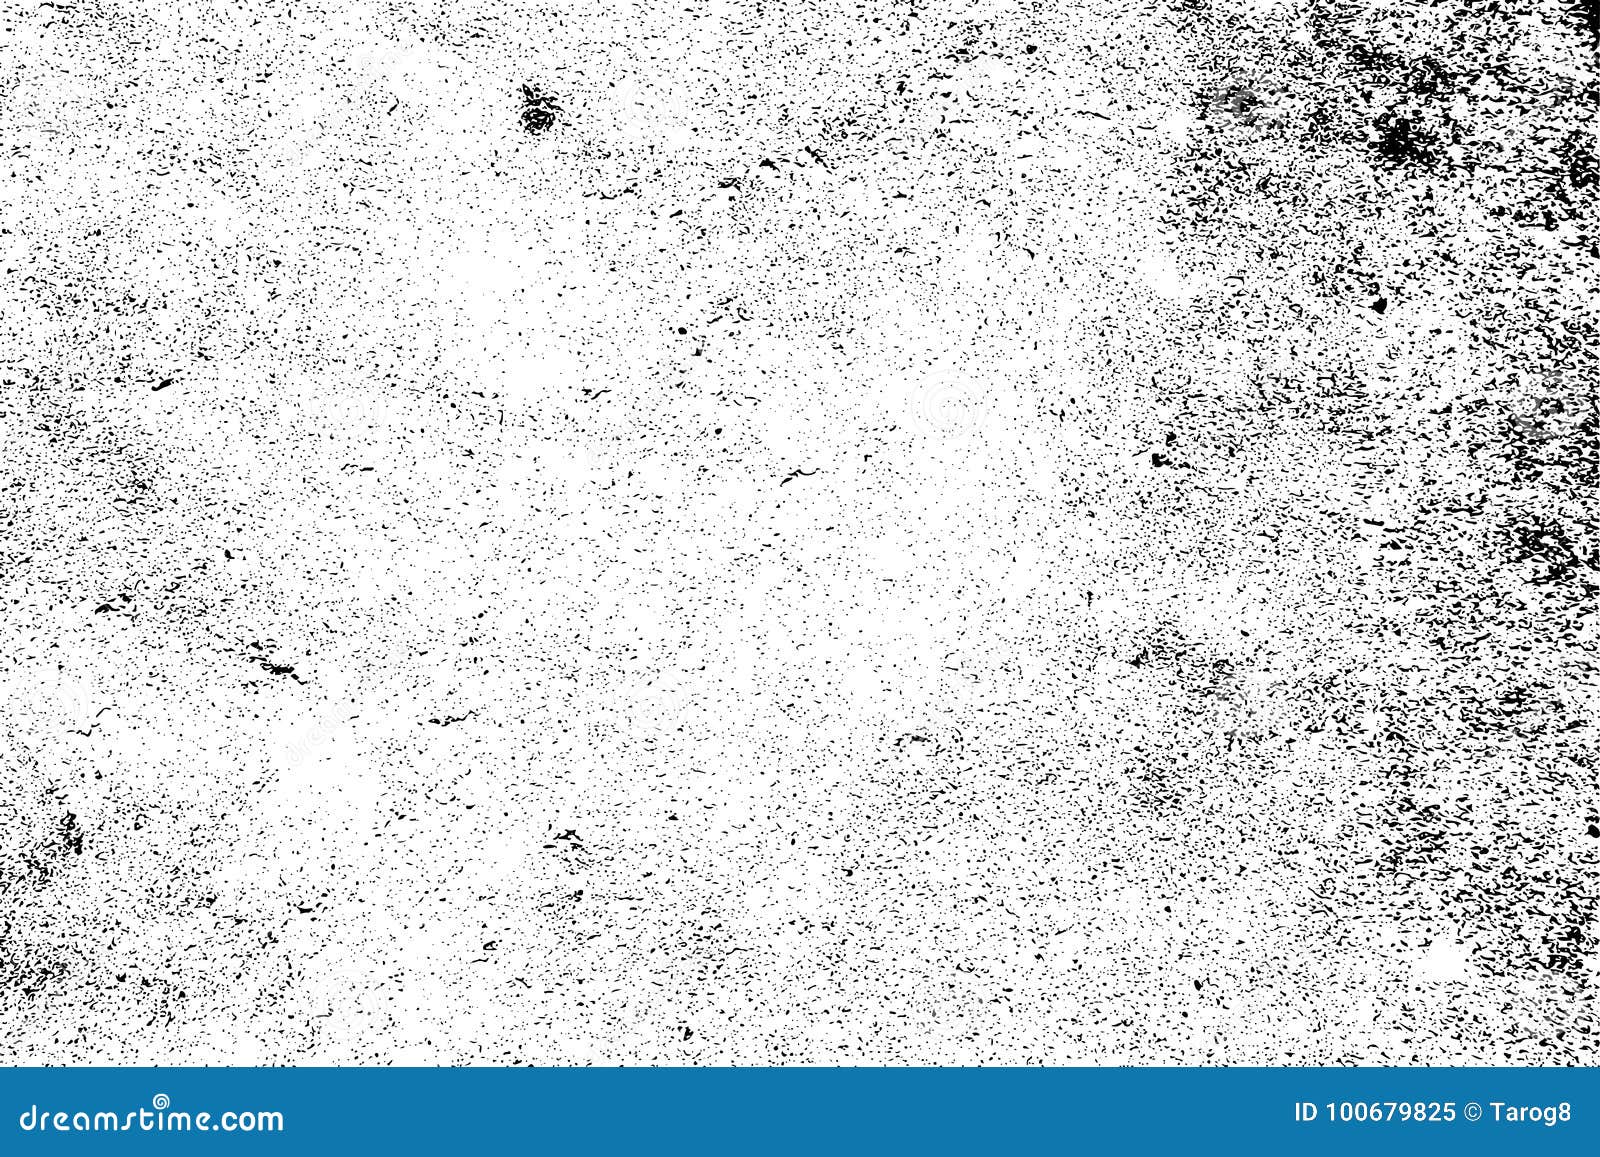 distressed halftone grunge black and white  texture -texture of concrete floor background for creation abstract